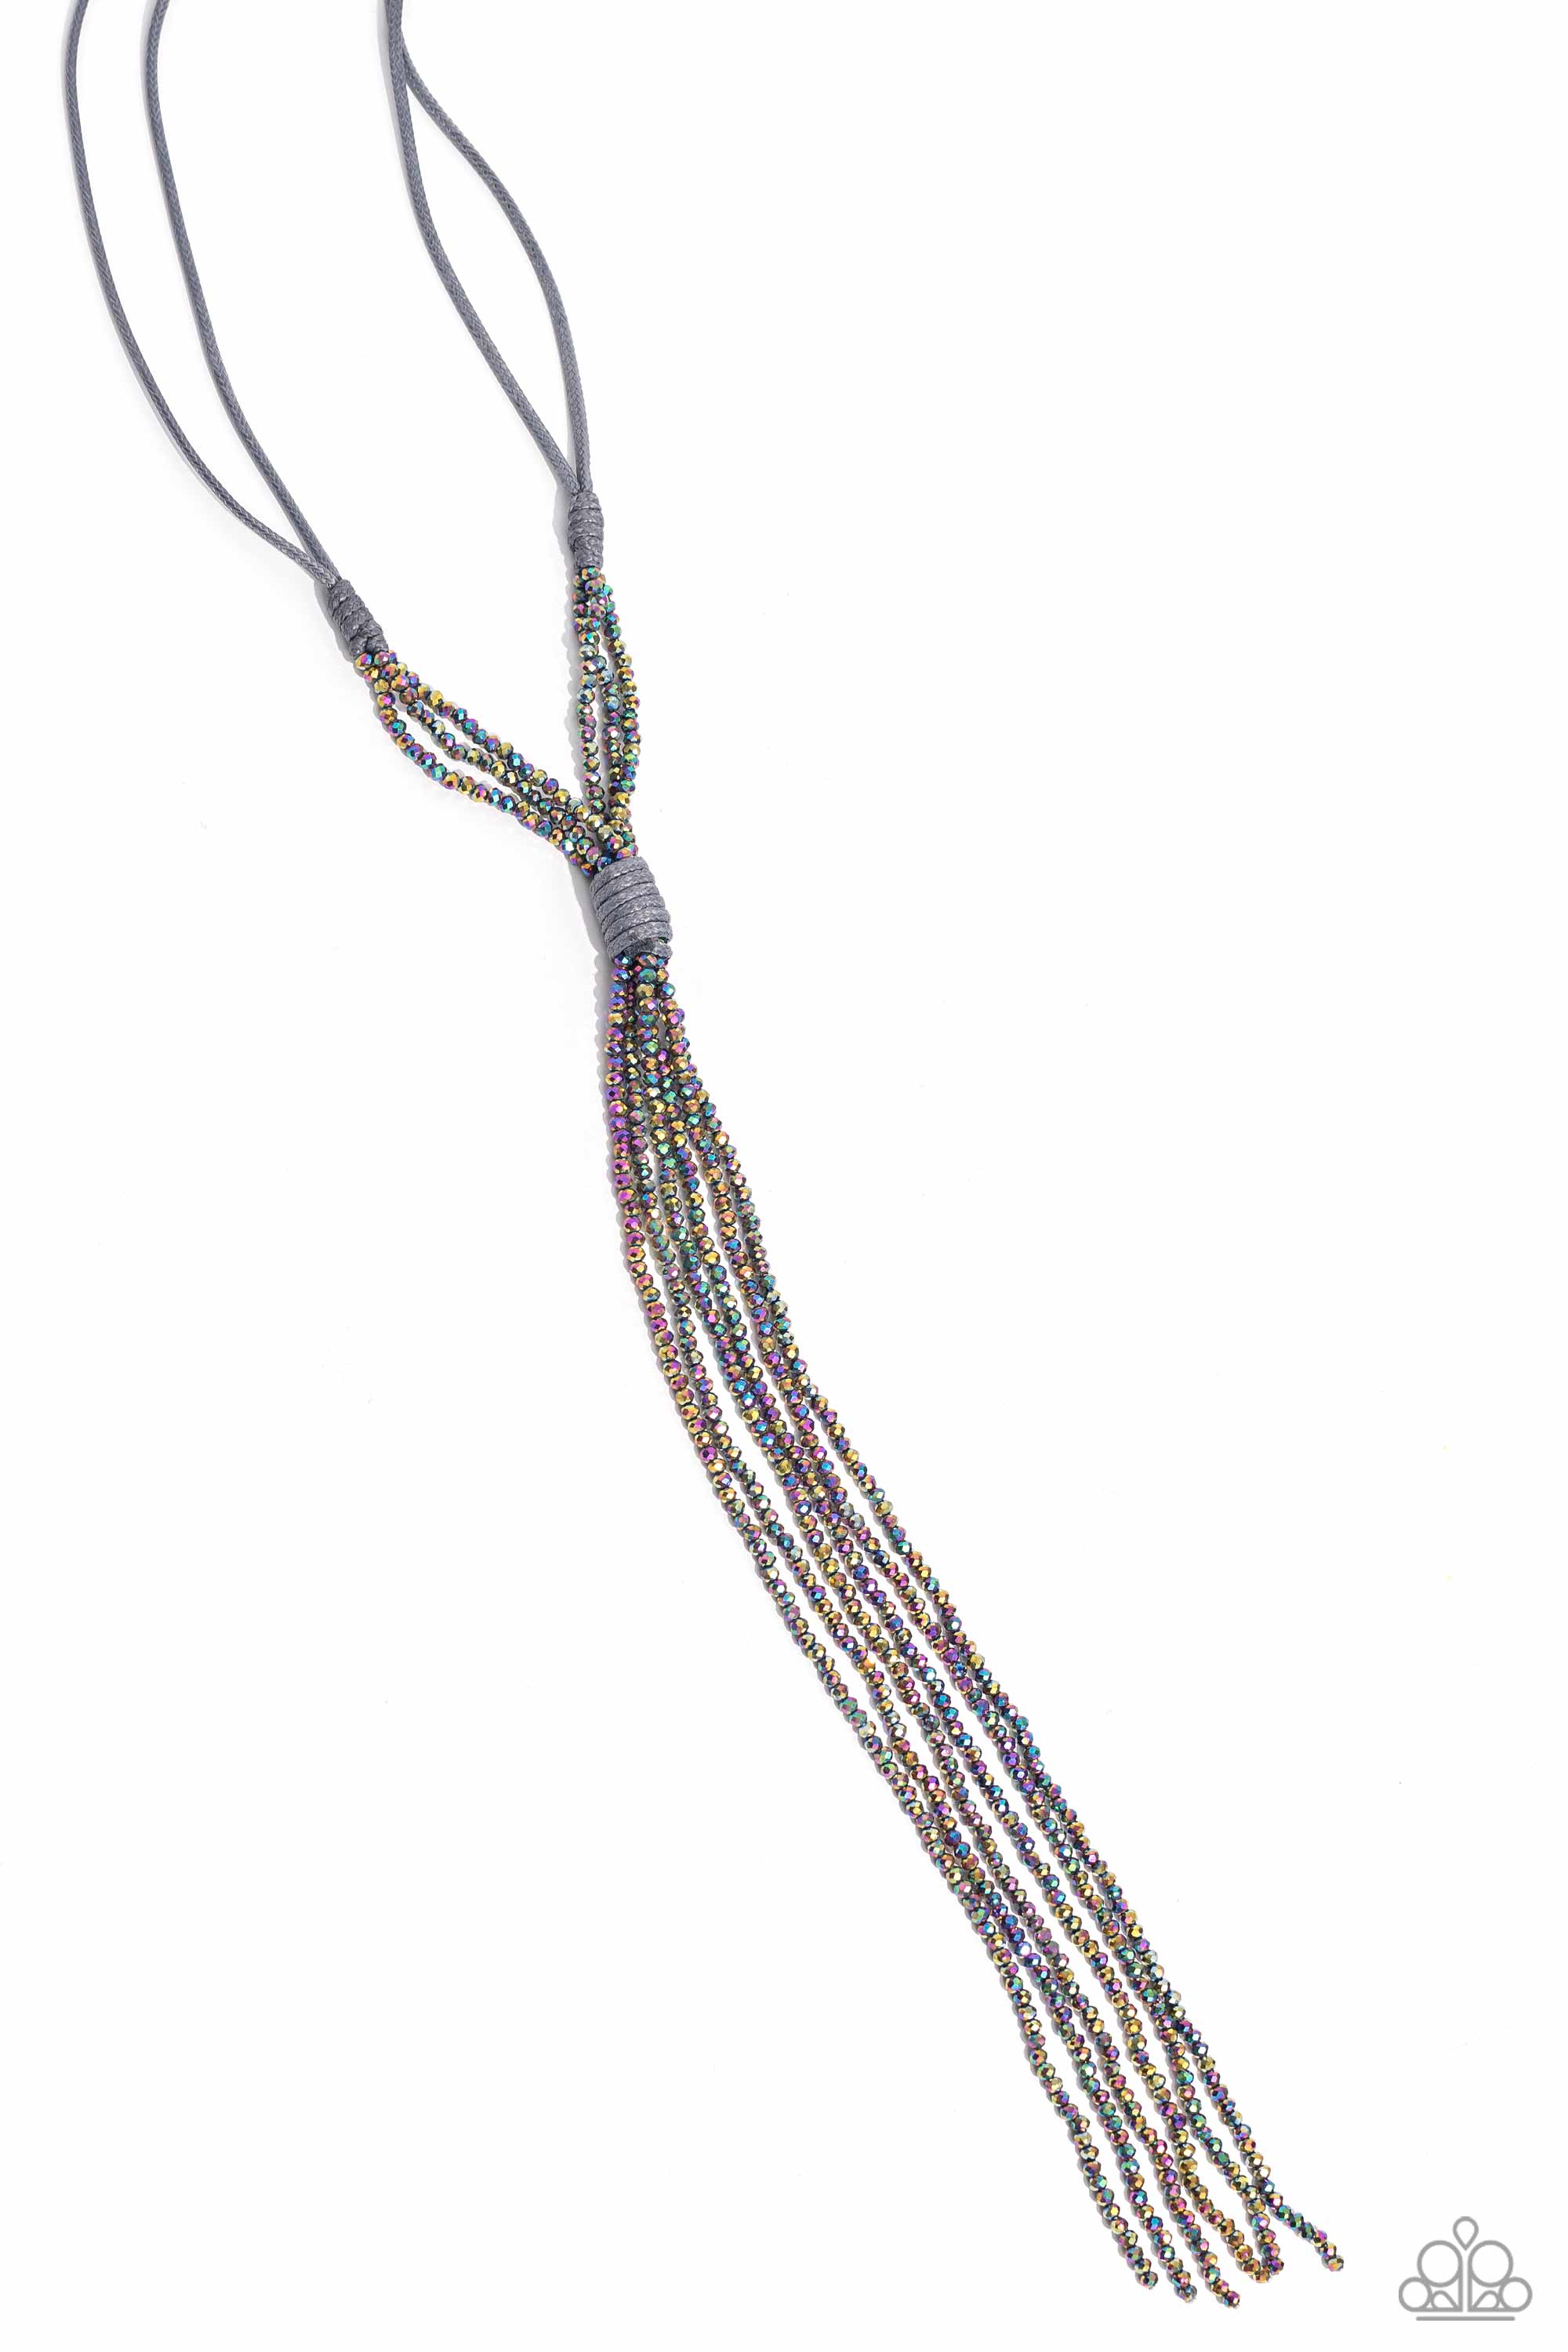 Knotted Karma Silver & Oil Spill Tassel Necklace - Paparazzi Accessories- lightbox - CarasShop.com - $5 Jewelry by Cara Jewels